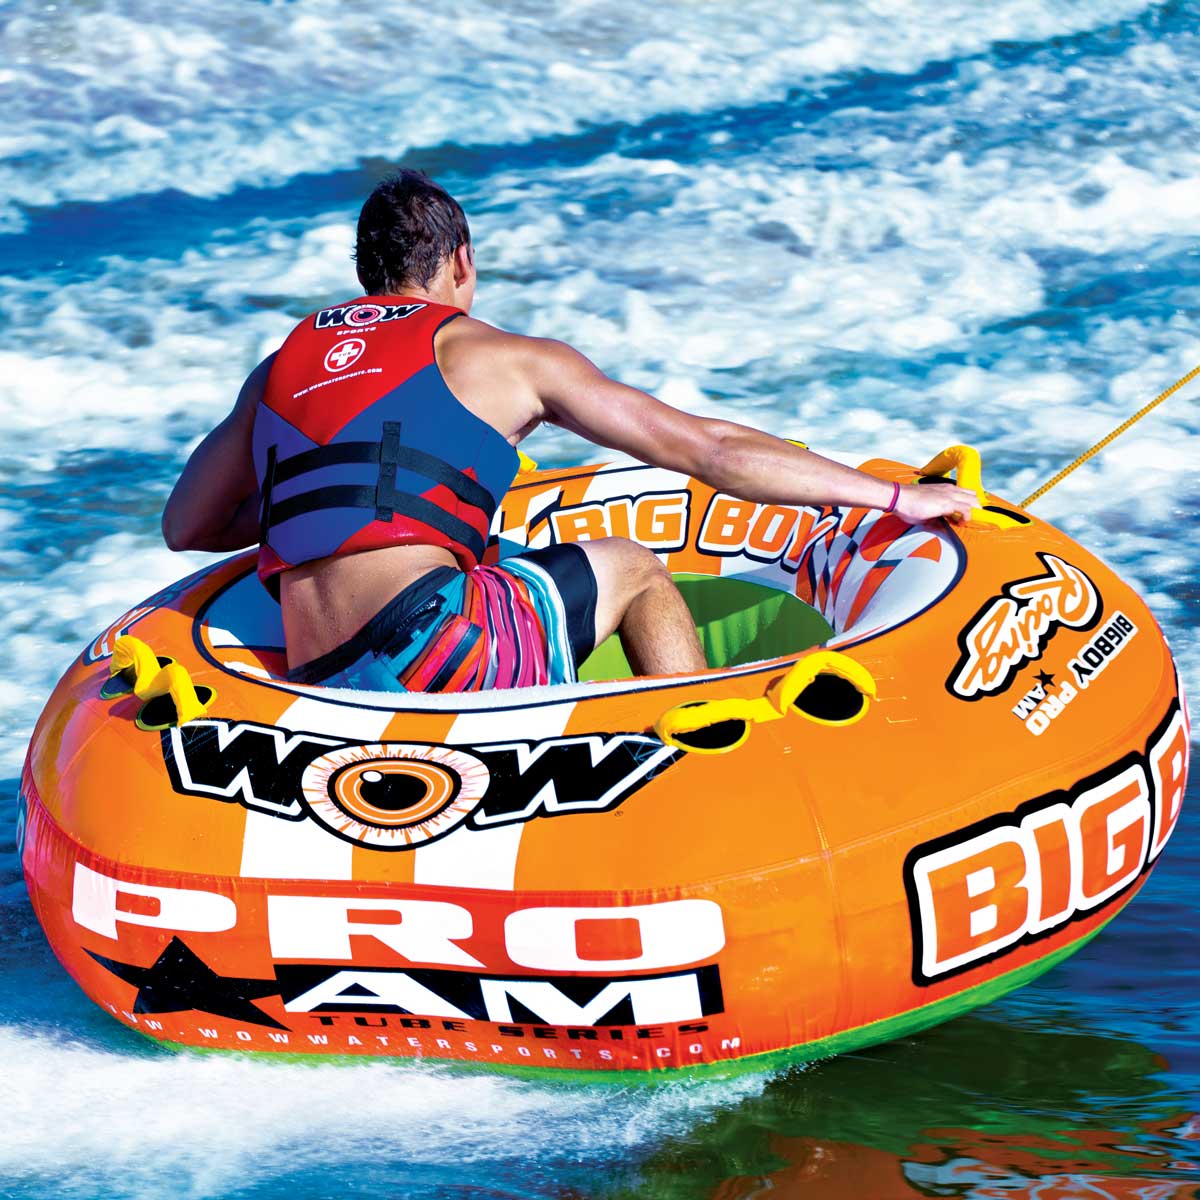 [Set of 2] WOW BIGBOY RACING 4 people W15-1130 Water toy Banana boat Towing tube Rubber boat 